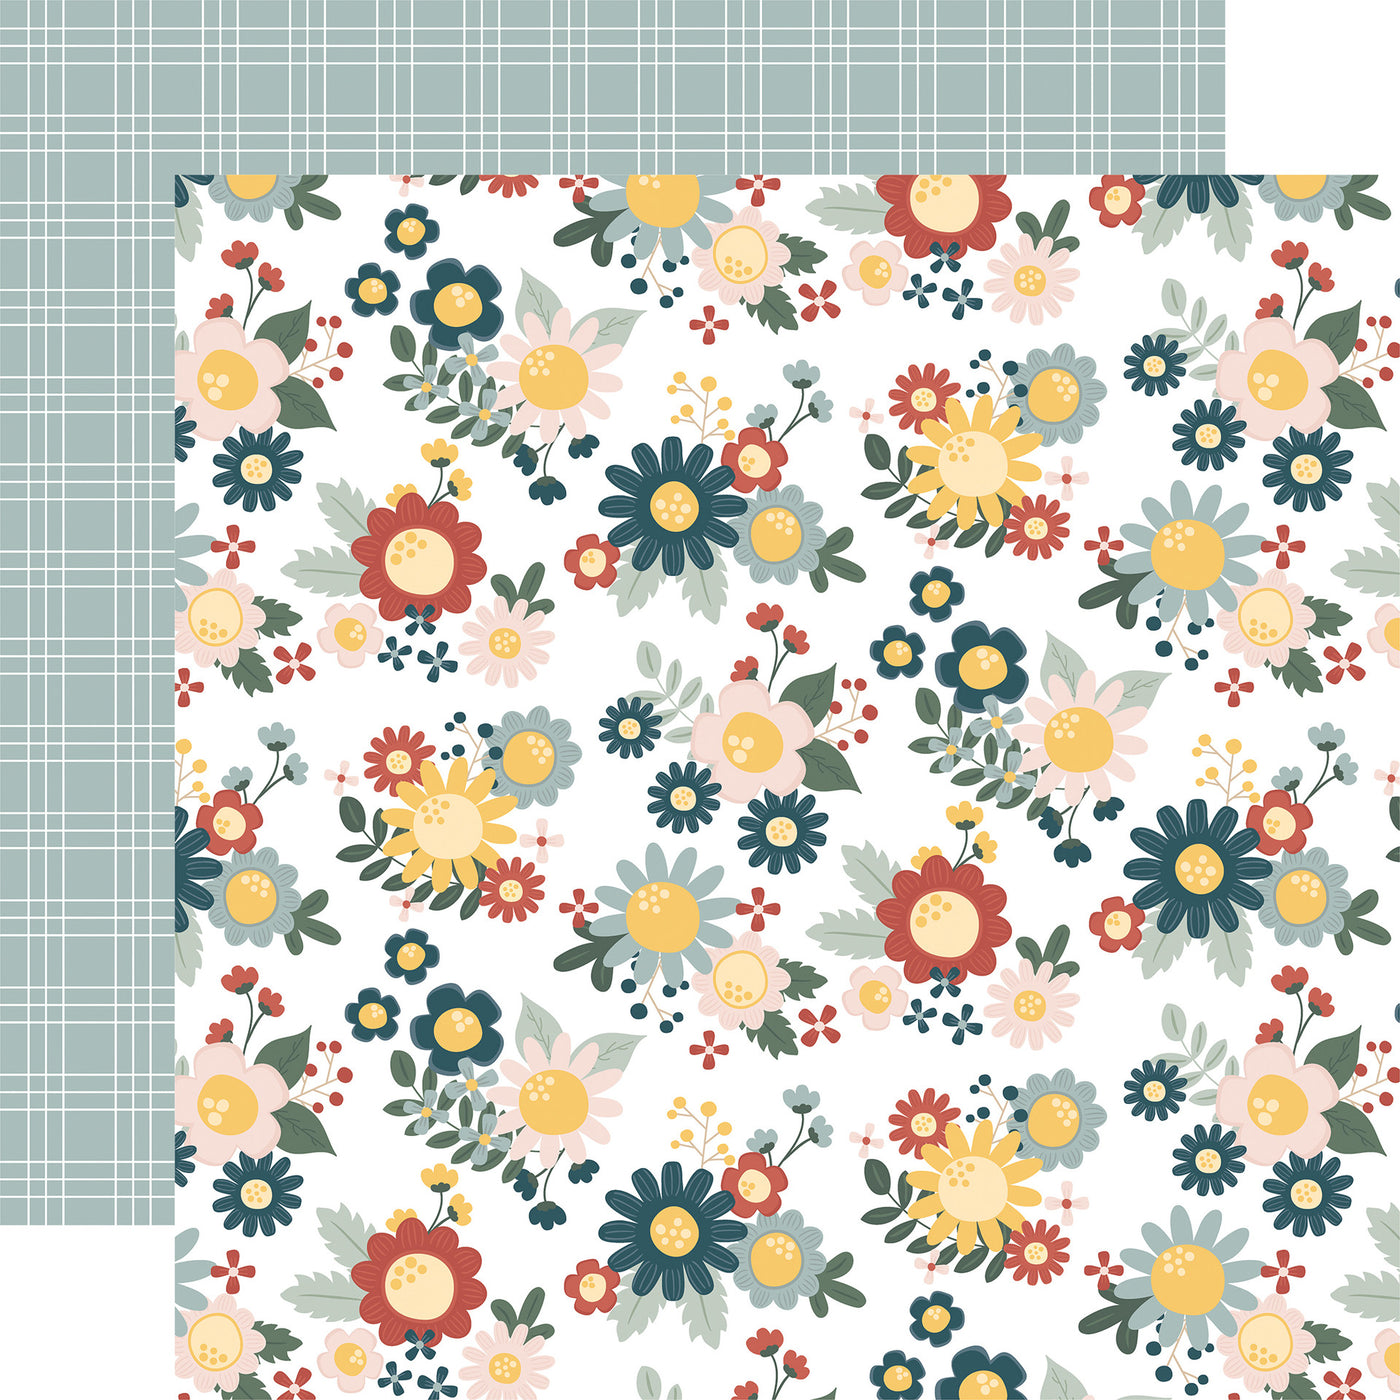 12x12 double-sided patterned paper. (Side A - blue, yellow, green, and pink floral on a white background; Side B - white plaid on a light blue background)